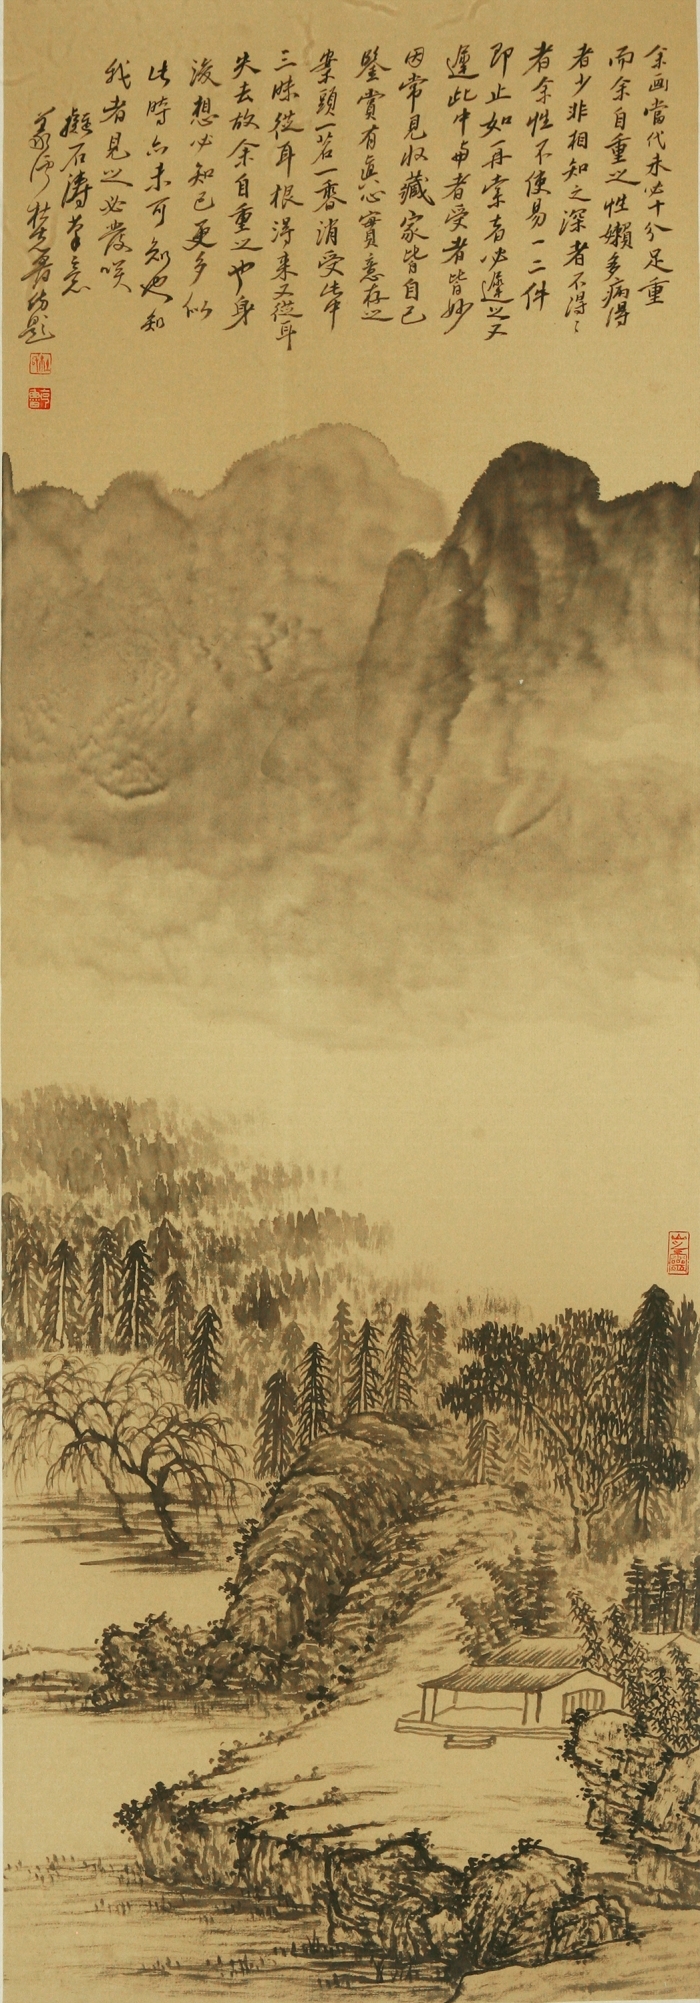 Hefeng Hall Gallery's Contemporary Chinese Painting - Learning form the Past 10